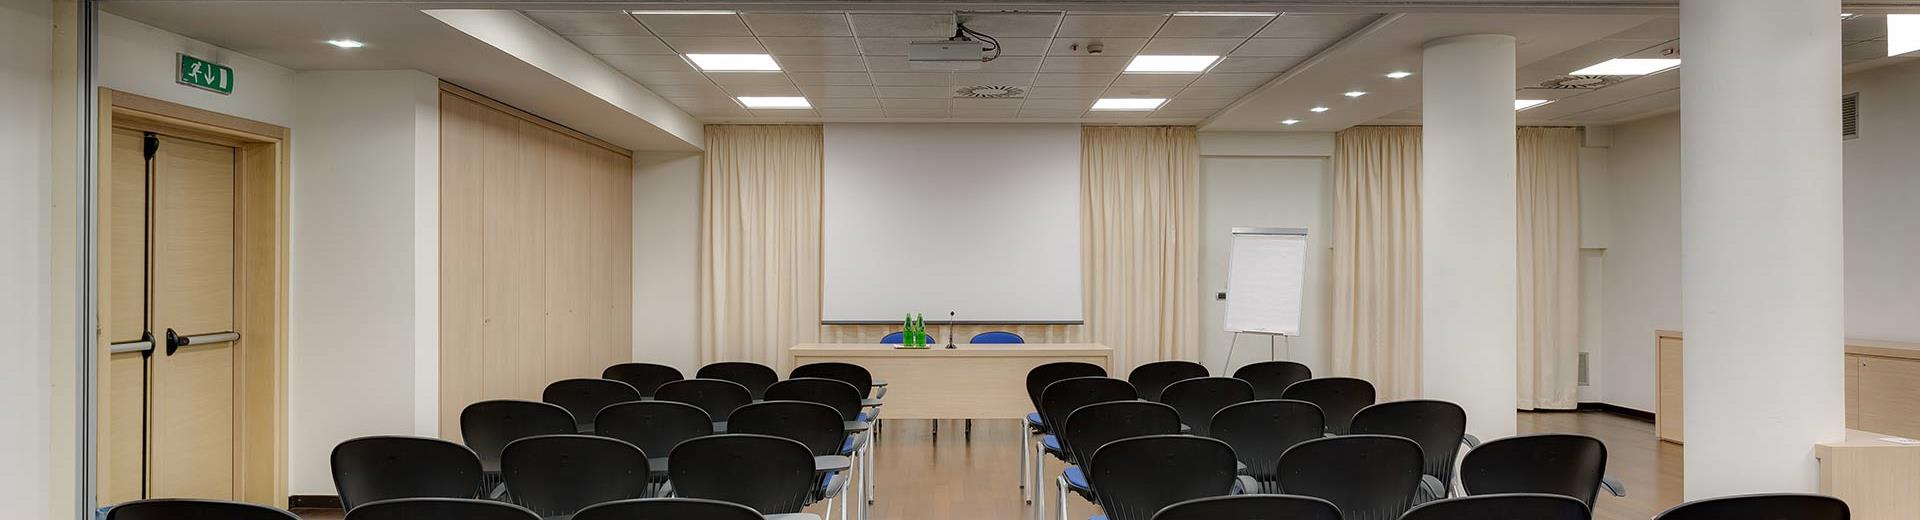 Meeting room for your conferences in Siena: Book The BW Hotel San Marco